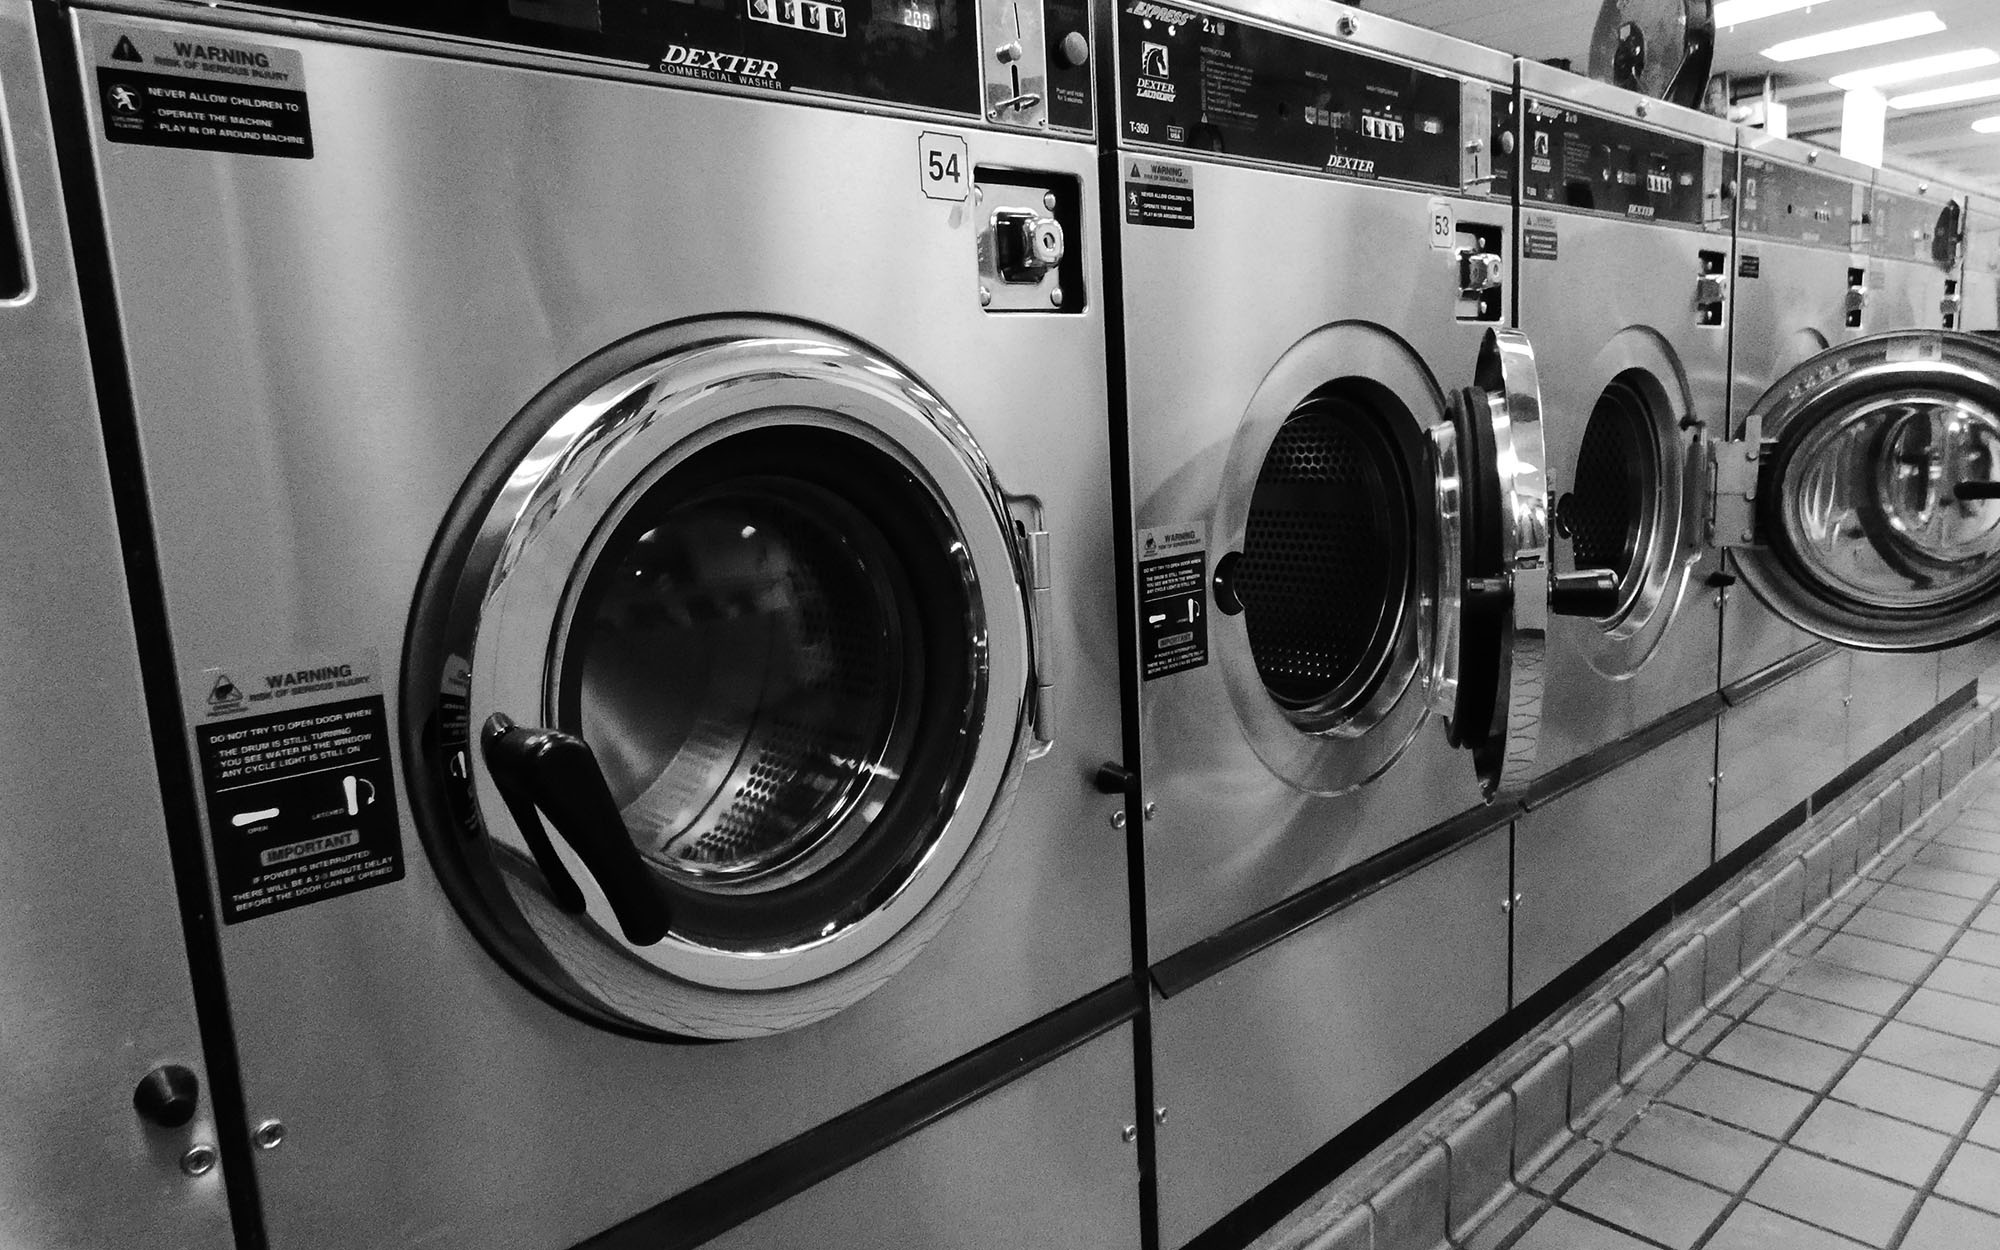 Washing machines in a commerical laundry - Image credit: Aaron Meacham